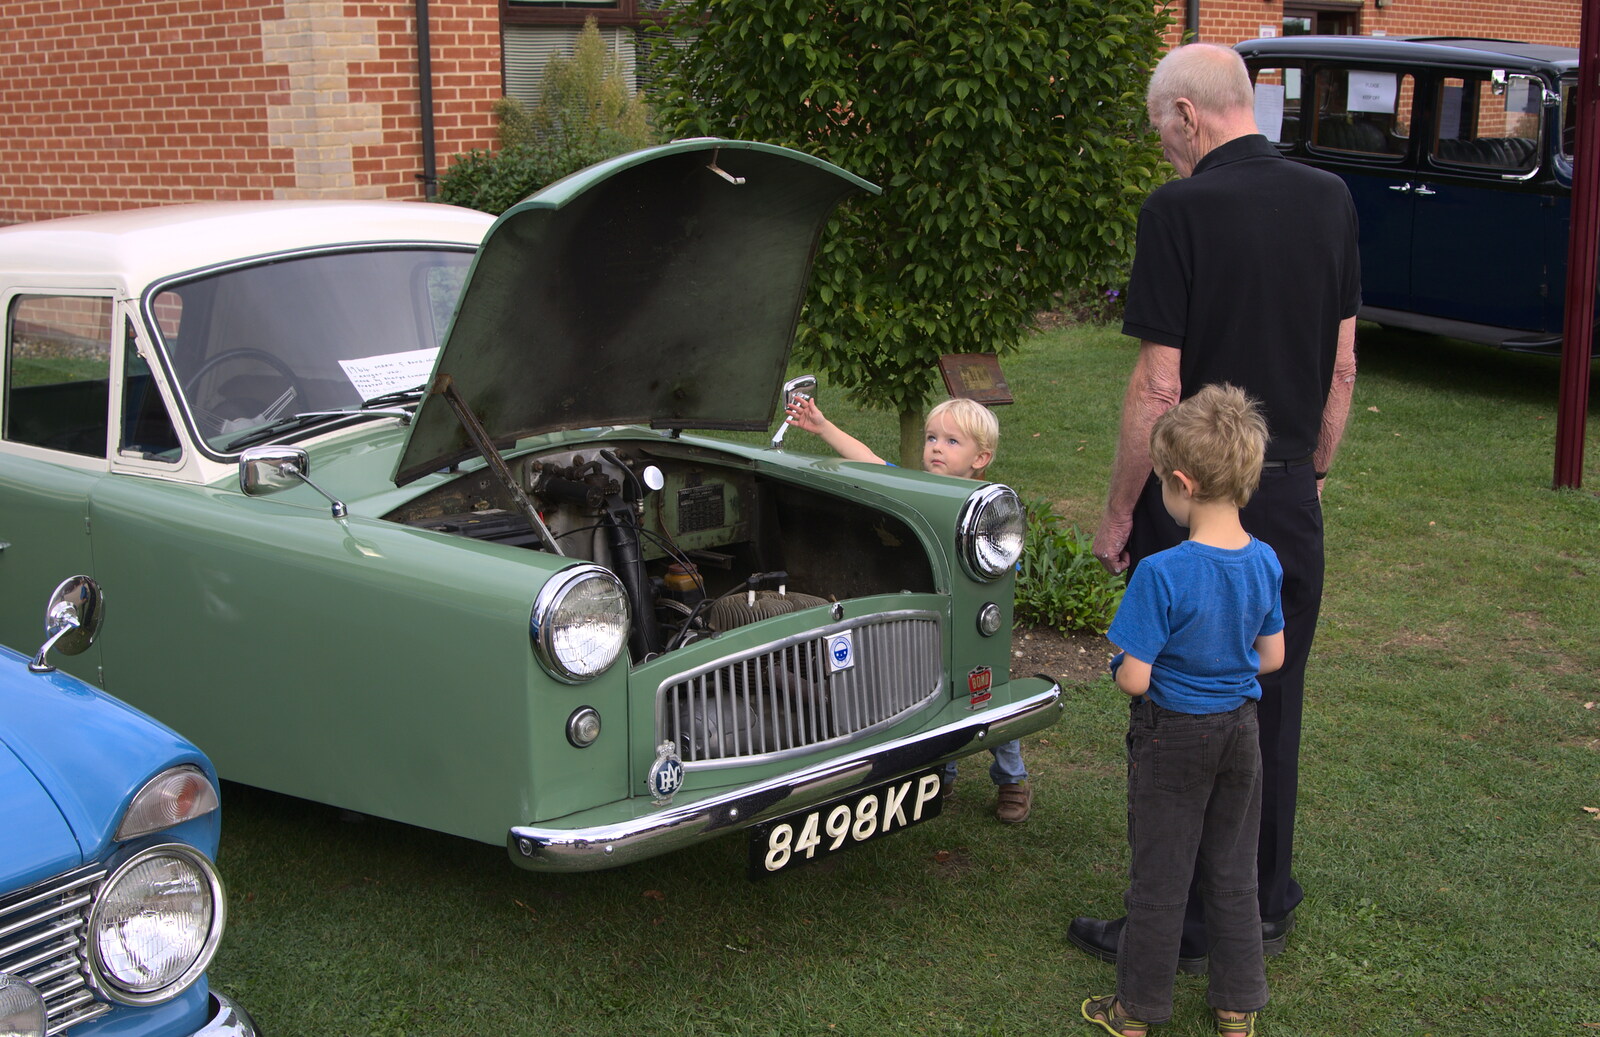 The boys look at old car from A Trip to Bressingham Steam Museum, Bressingham, Norfolk - 28th September 2014